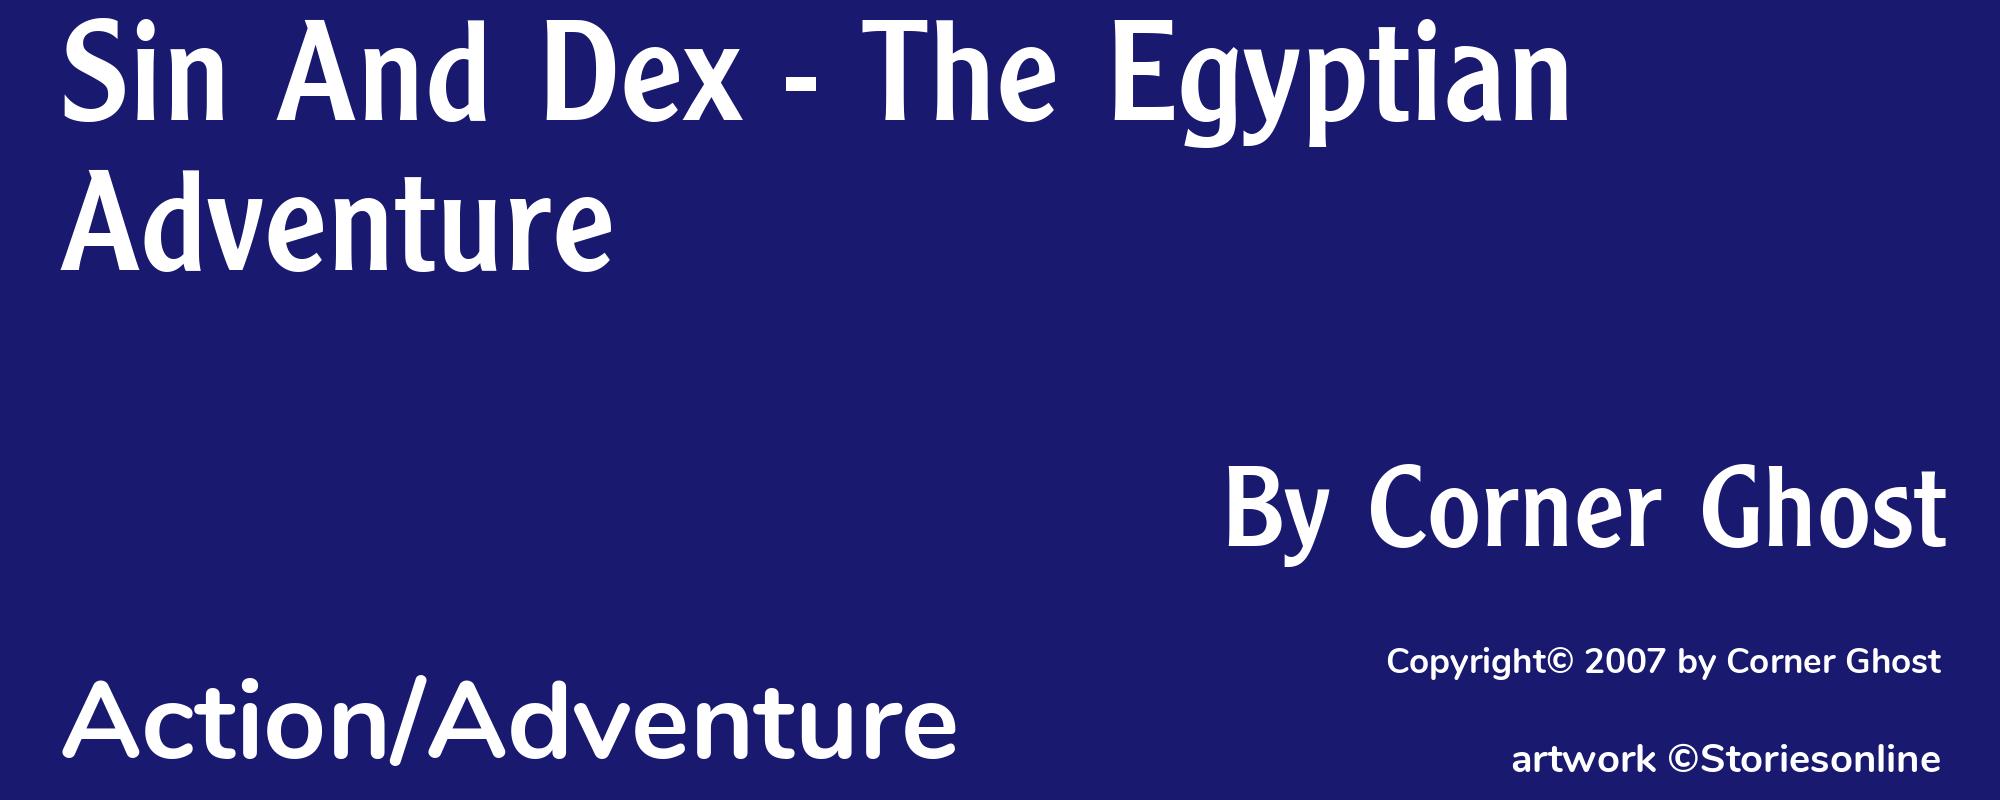 Sin And Dex - The Egyptian Adventure - Cover